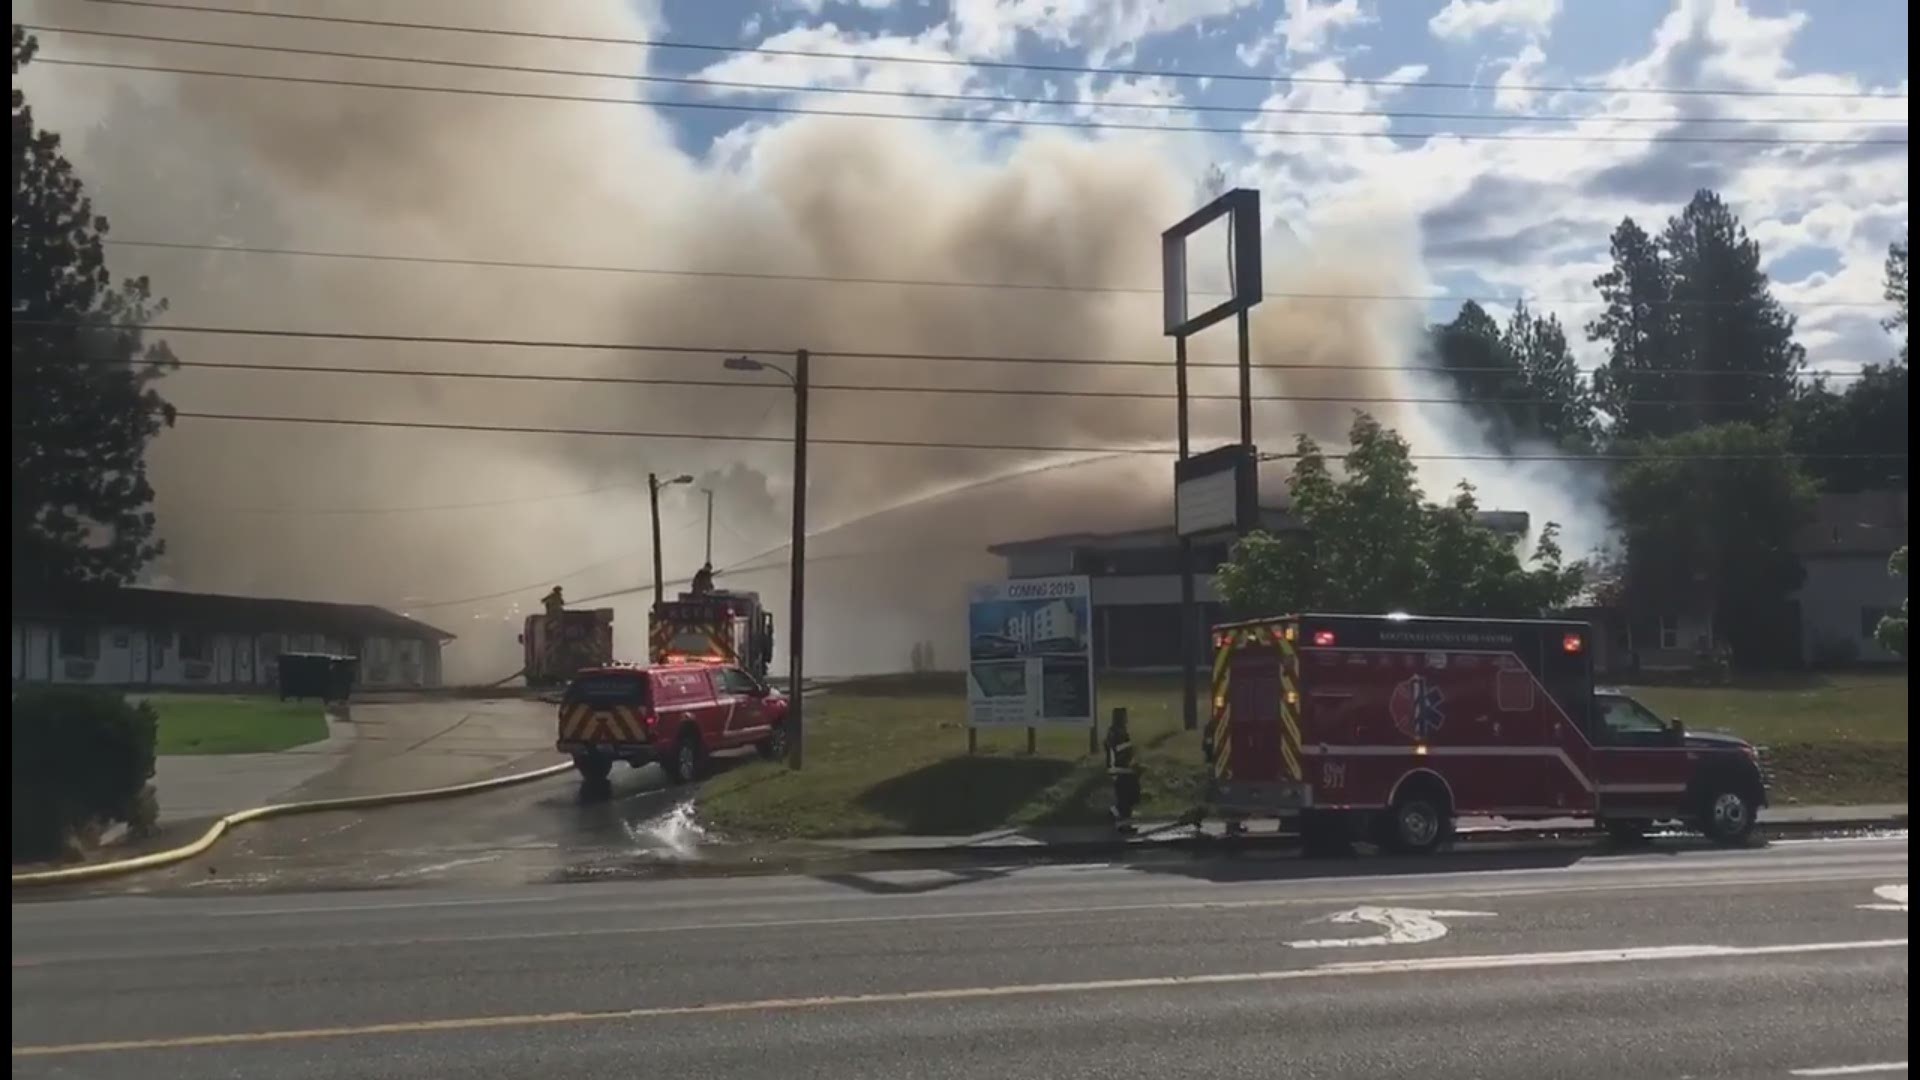 Viewer Roy Betts shared this video of a fire burning at the old Garden Motel on Northwest Boulevard in Coeur d'Alene.